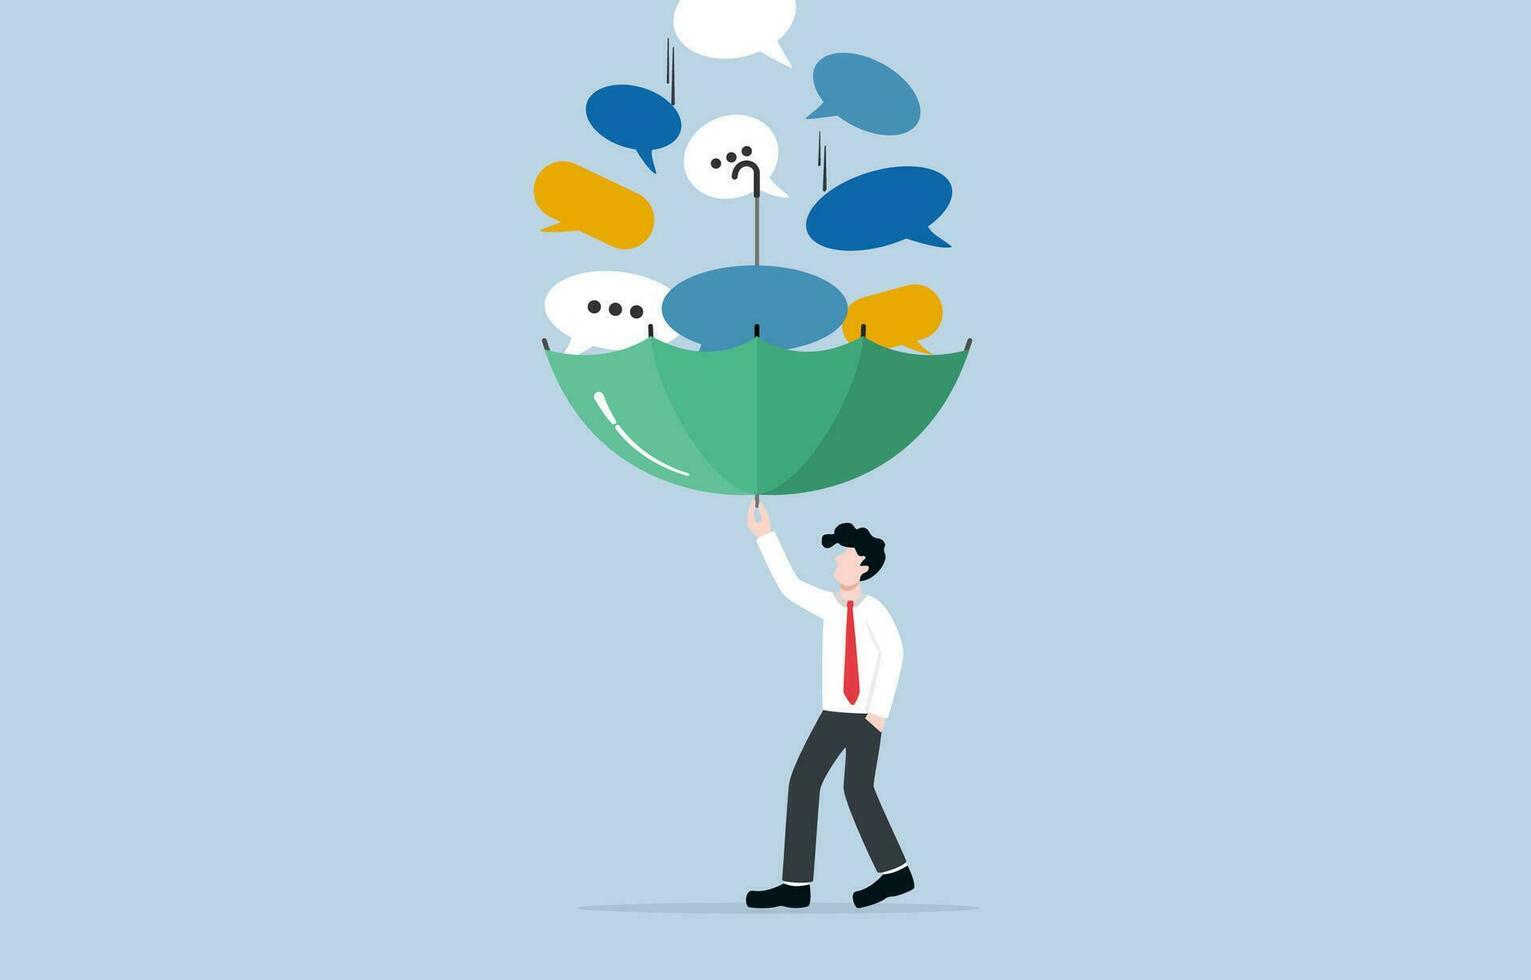 Listening to opinions, good listener, accepting criticism for self-improvement concept, Businessman opening umbrella to support falling speech bubbles. vector